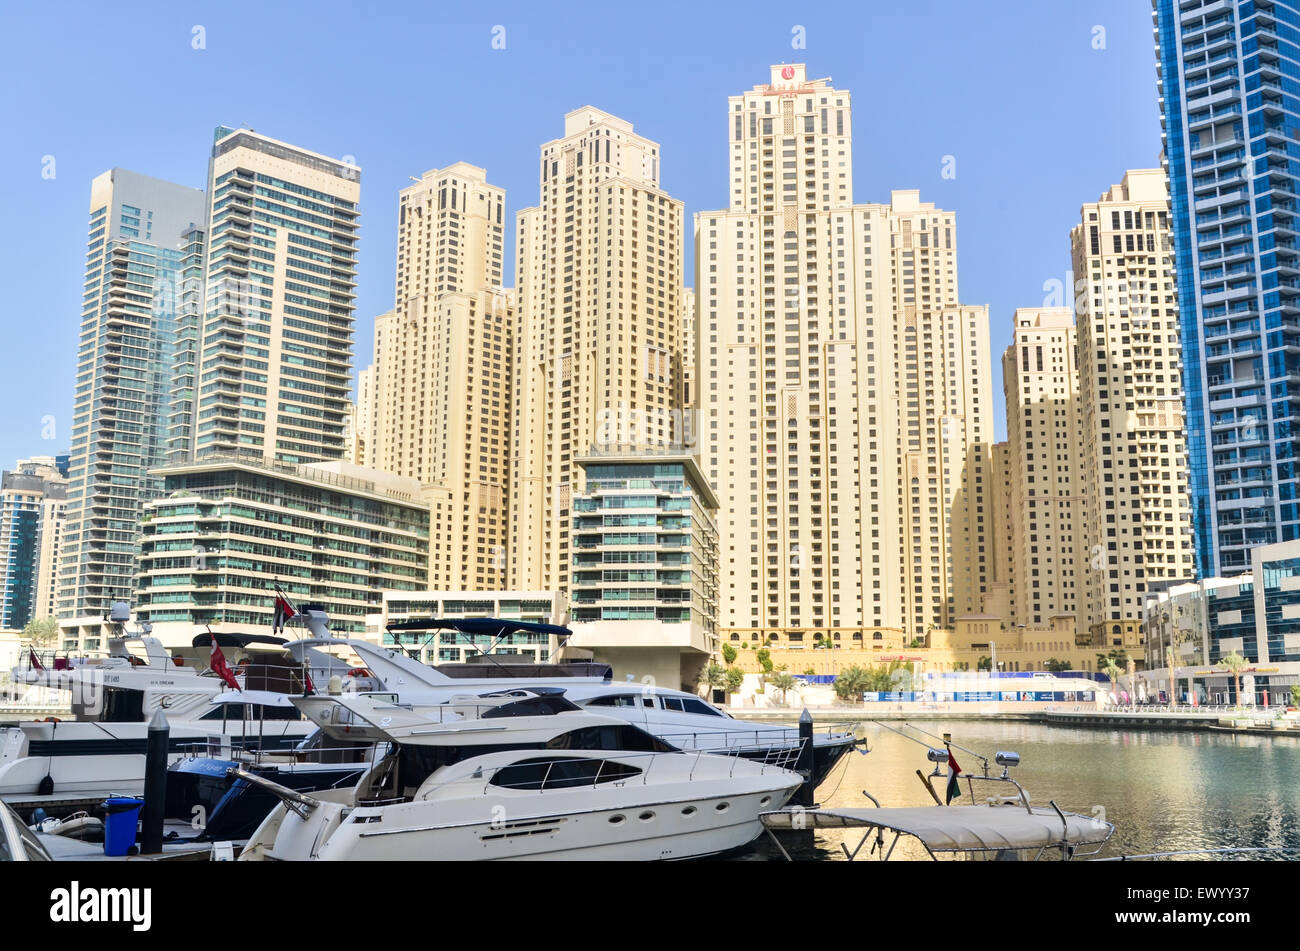 Skyscrapers, Futuristic and modern high rise buildings, towers and hotels of the Dubai Marina, United Arab Emirates Stock Photo